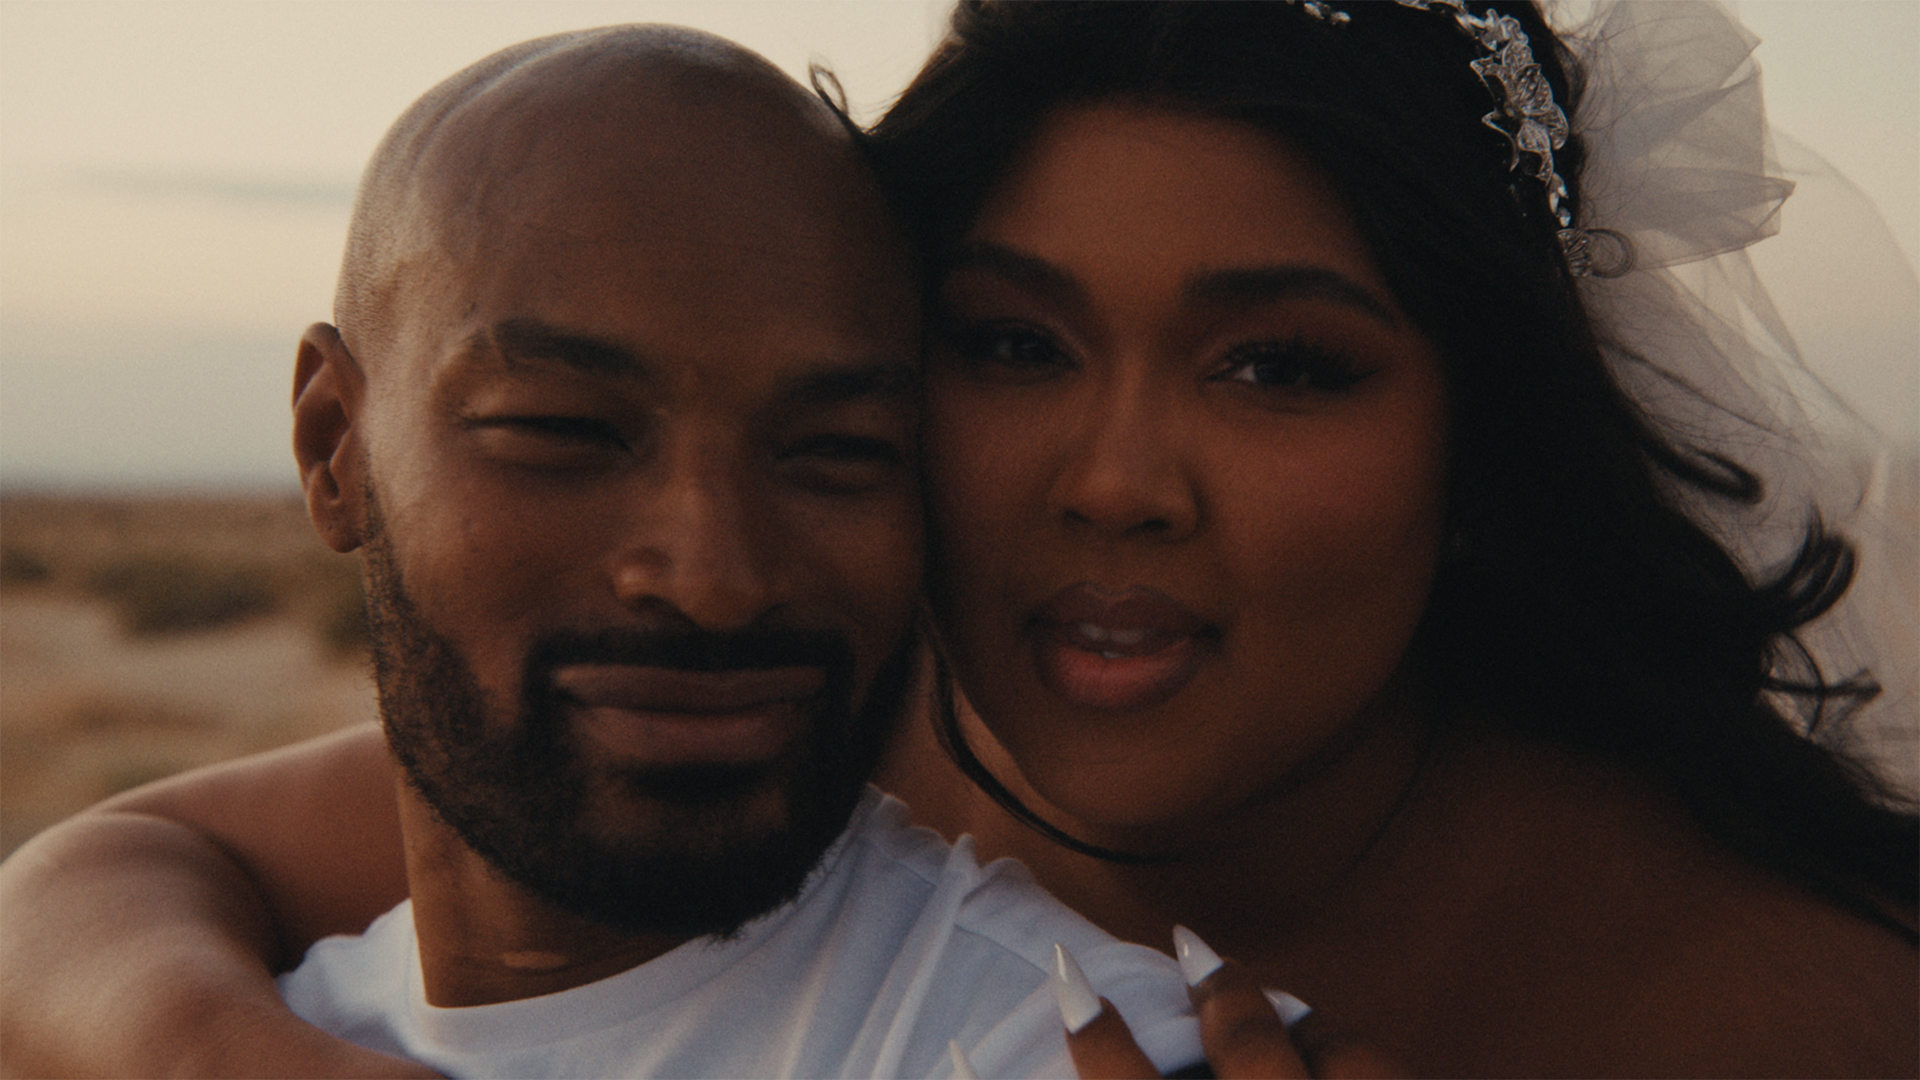 From the ‘2 Be Loved (Am I Ready)’ music video: Lizzo in a wedding gown embraces a man from behind